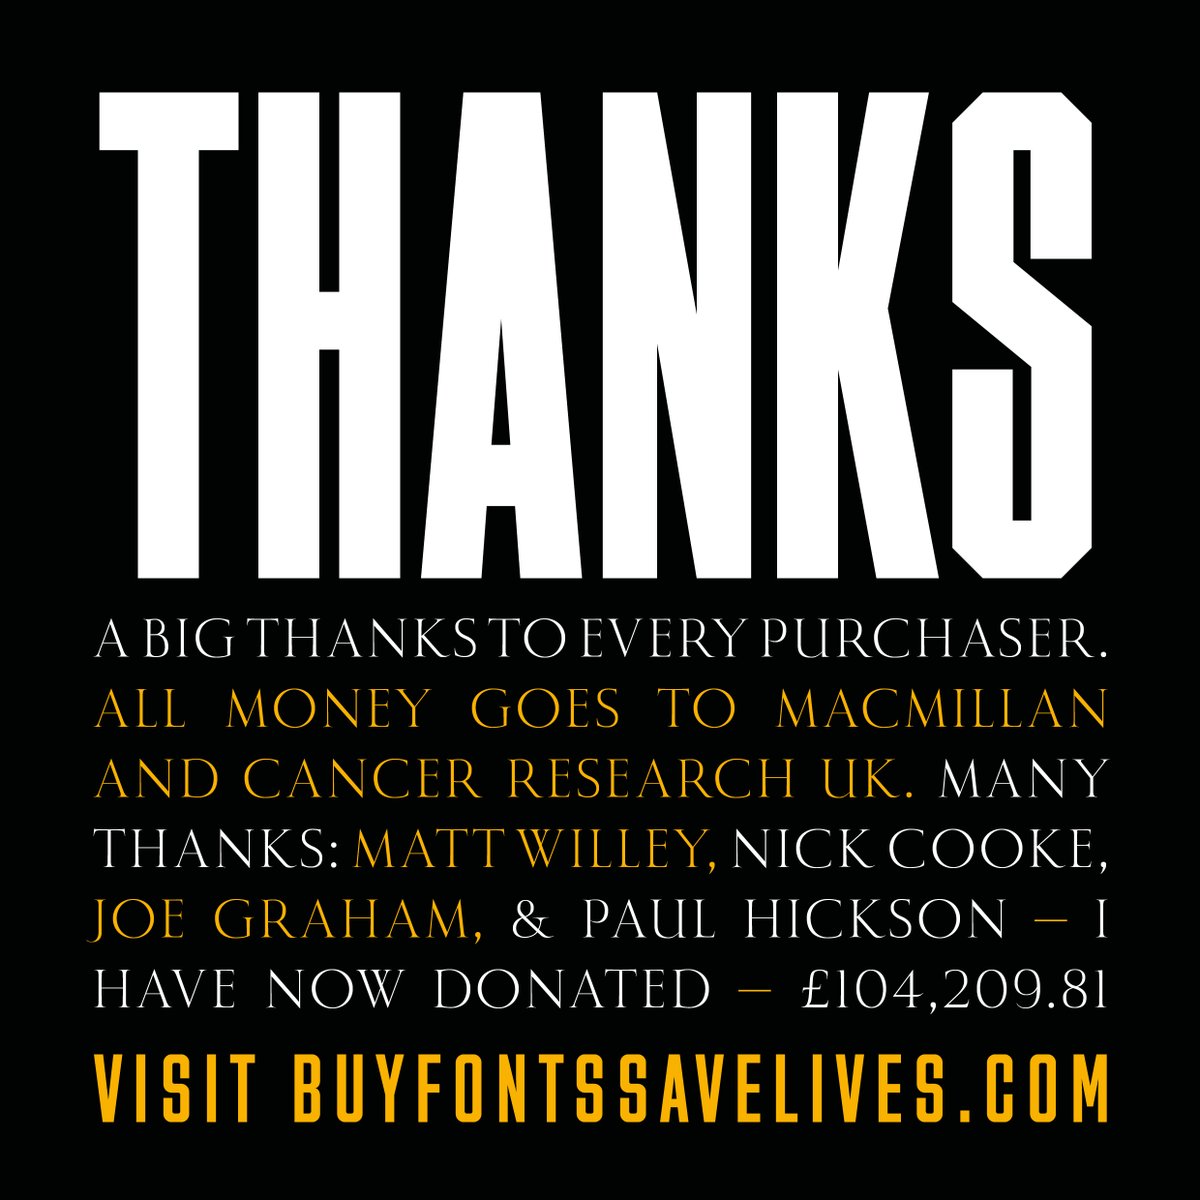 Wow! Paul Harpin's #BuyFontsSaveLives fundraising initiative featuring great type from Matt Willey & others, curated by Typespec, has broken the £100K barrier! A huge amount of money raised for @CR_UK & @macmillancancer. Thank you all so much! buyfontssavelives.com #cancer